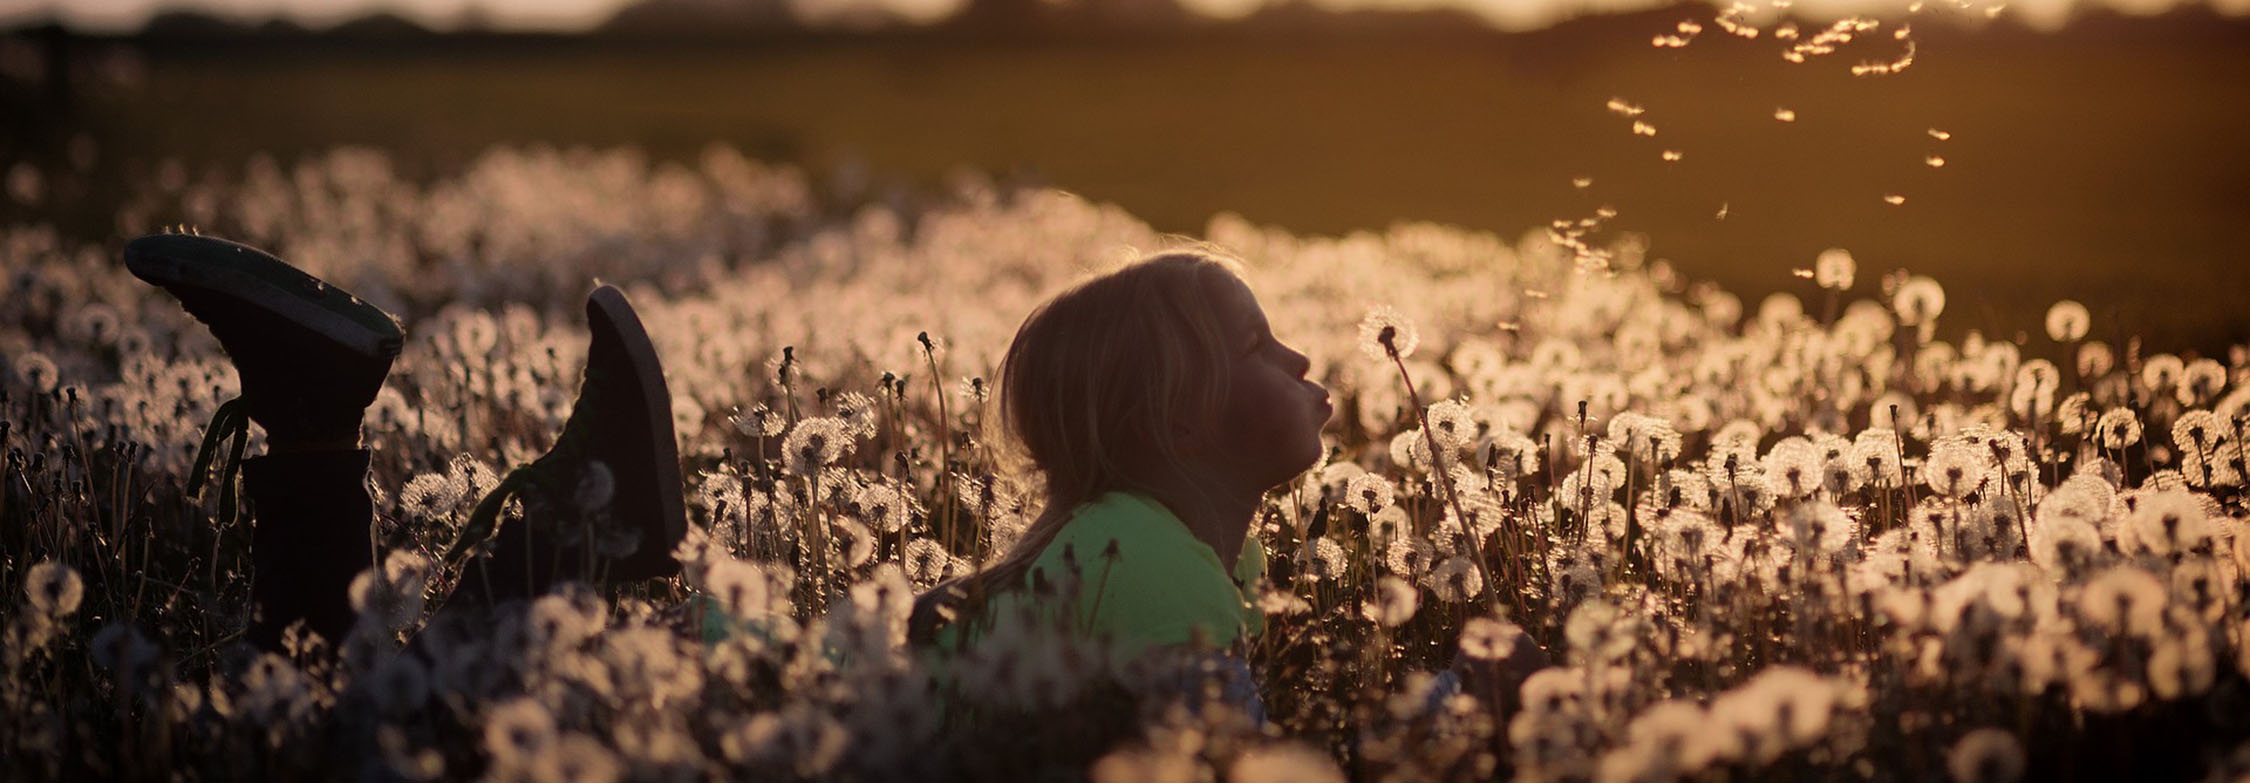 Girl in a dandelion field with dandelion seeds in flight signifying learning, growth and development